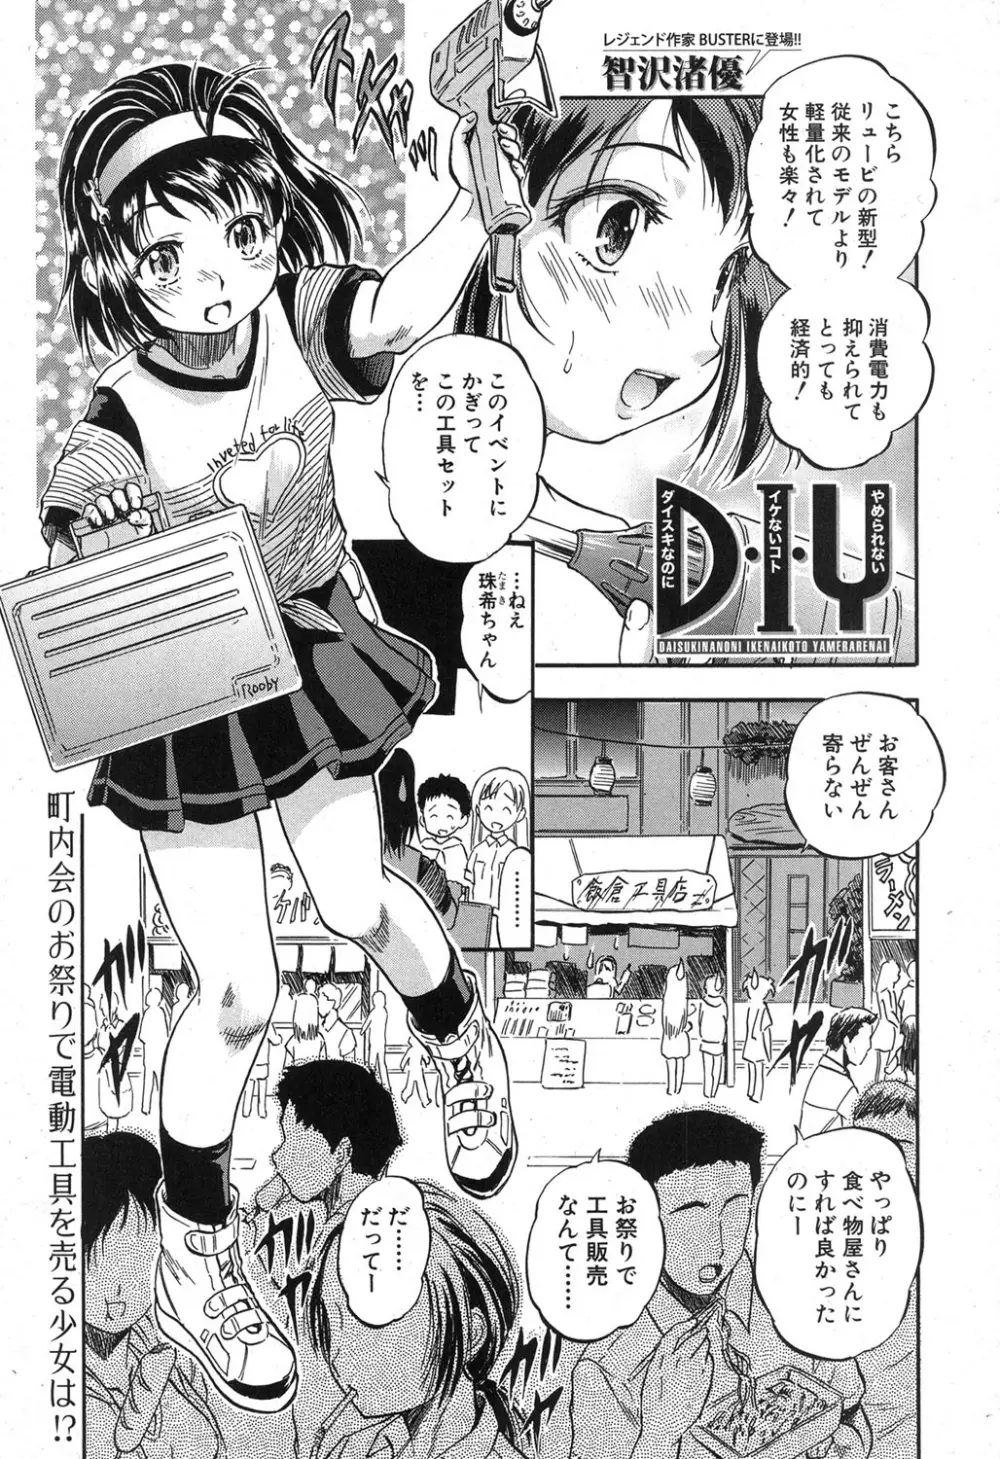 BUSTER COMIC 2015年11月号 Page.218